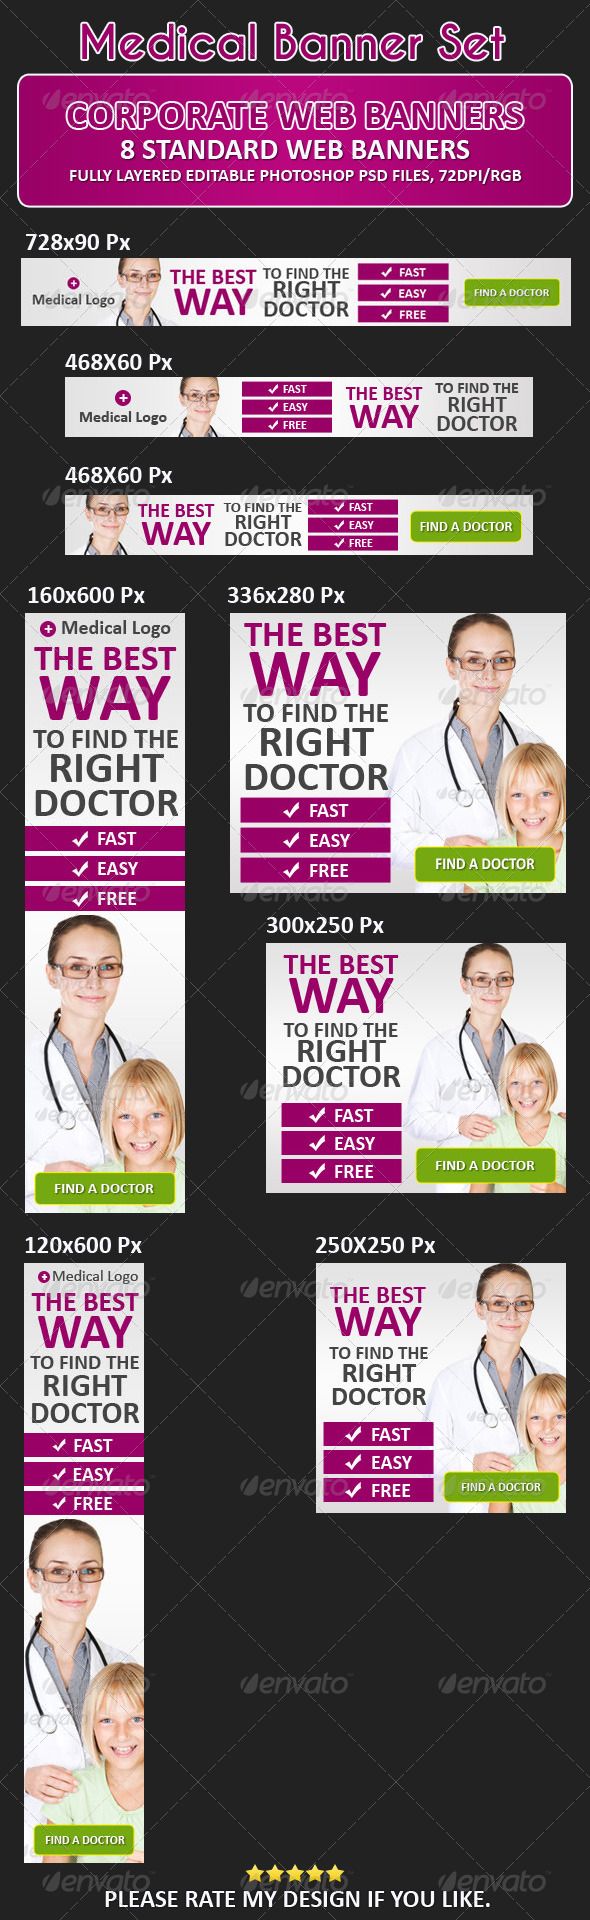 Healthcare-Advertising-Medical-Banners-GraphicRiver-Font-Used-Calibri-.cufonfonts-enfont Healthcare Advertising : Medical Banners   #GraphicRiver        Font Used: Calibri  .cufonfonts /en/font/...